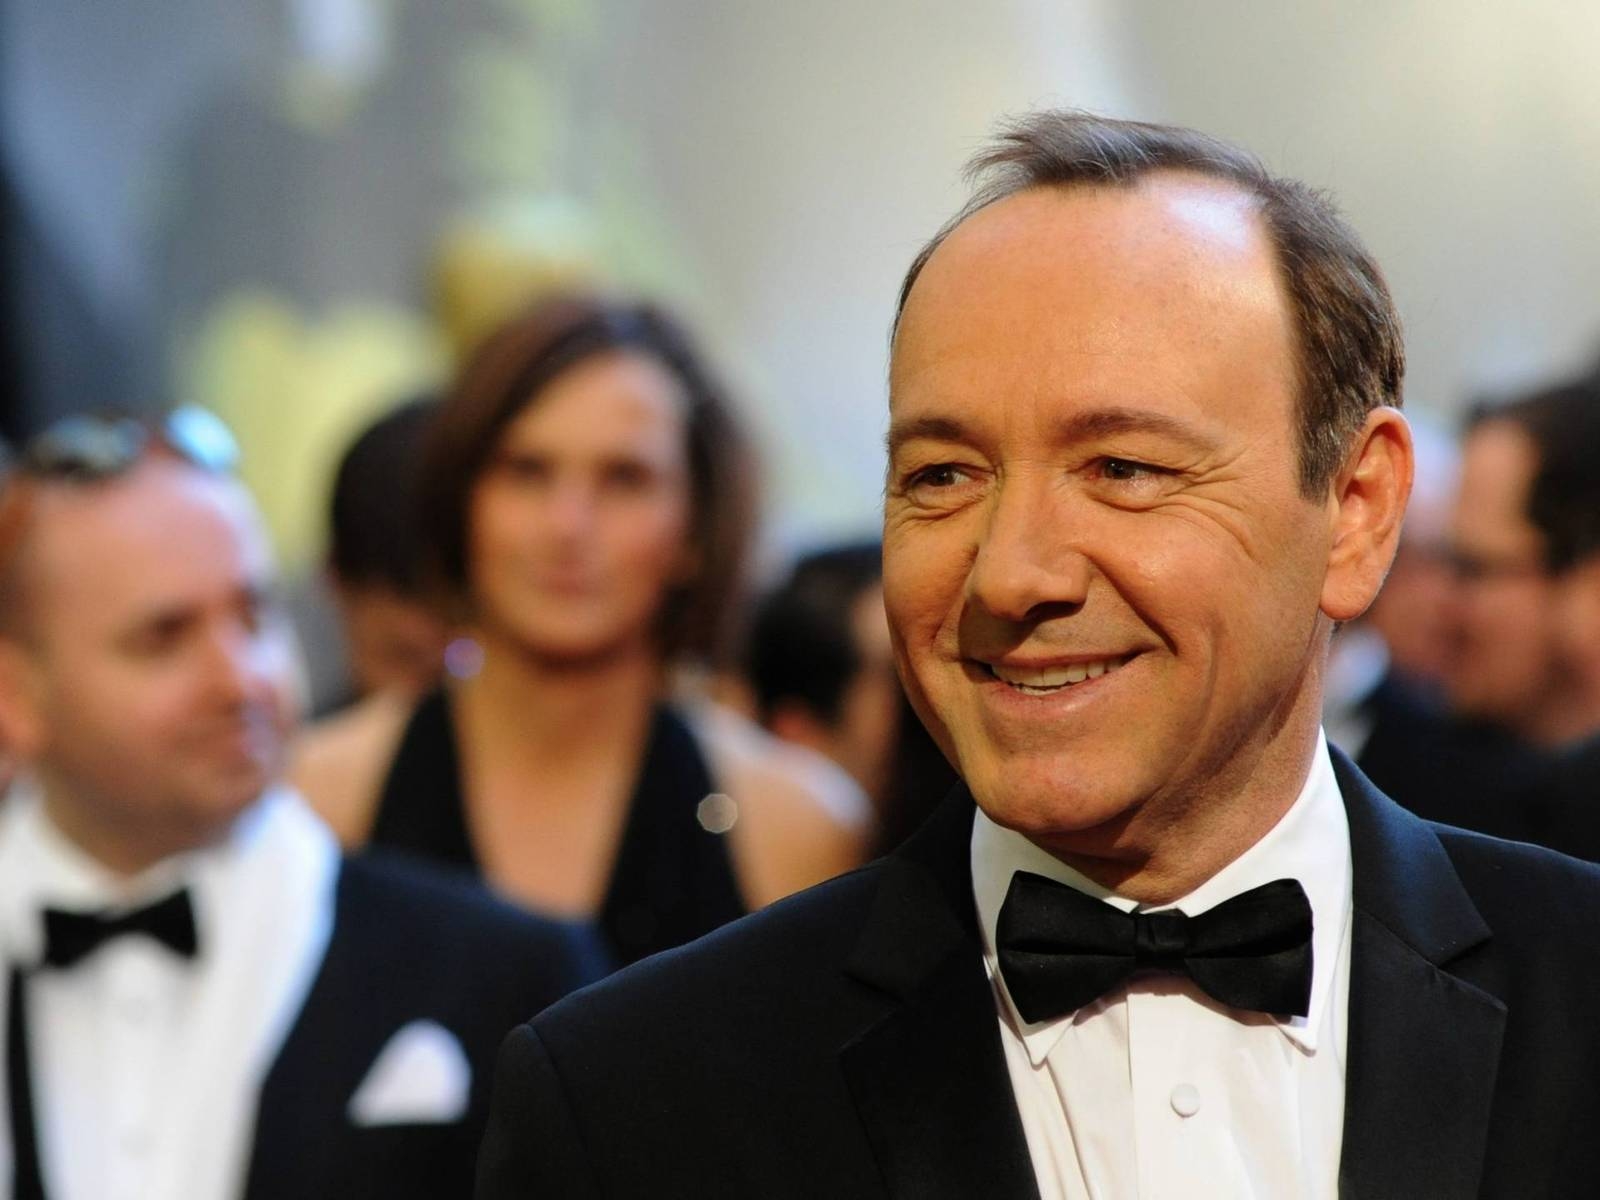 Kevin Spacey Smile for 1600 x 1200 resolution